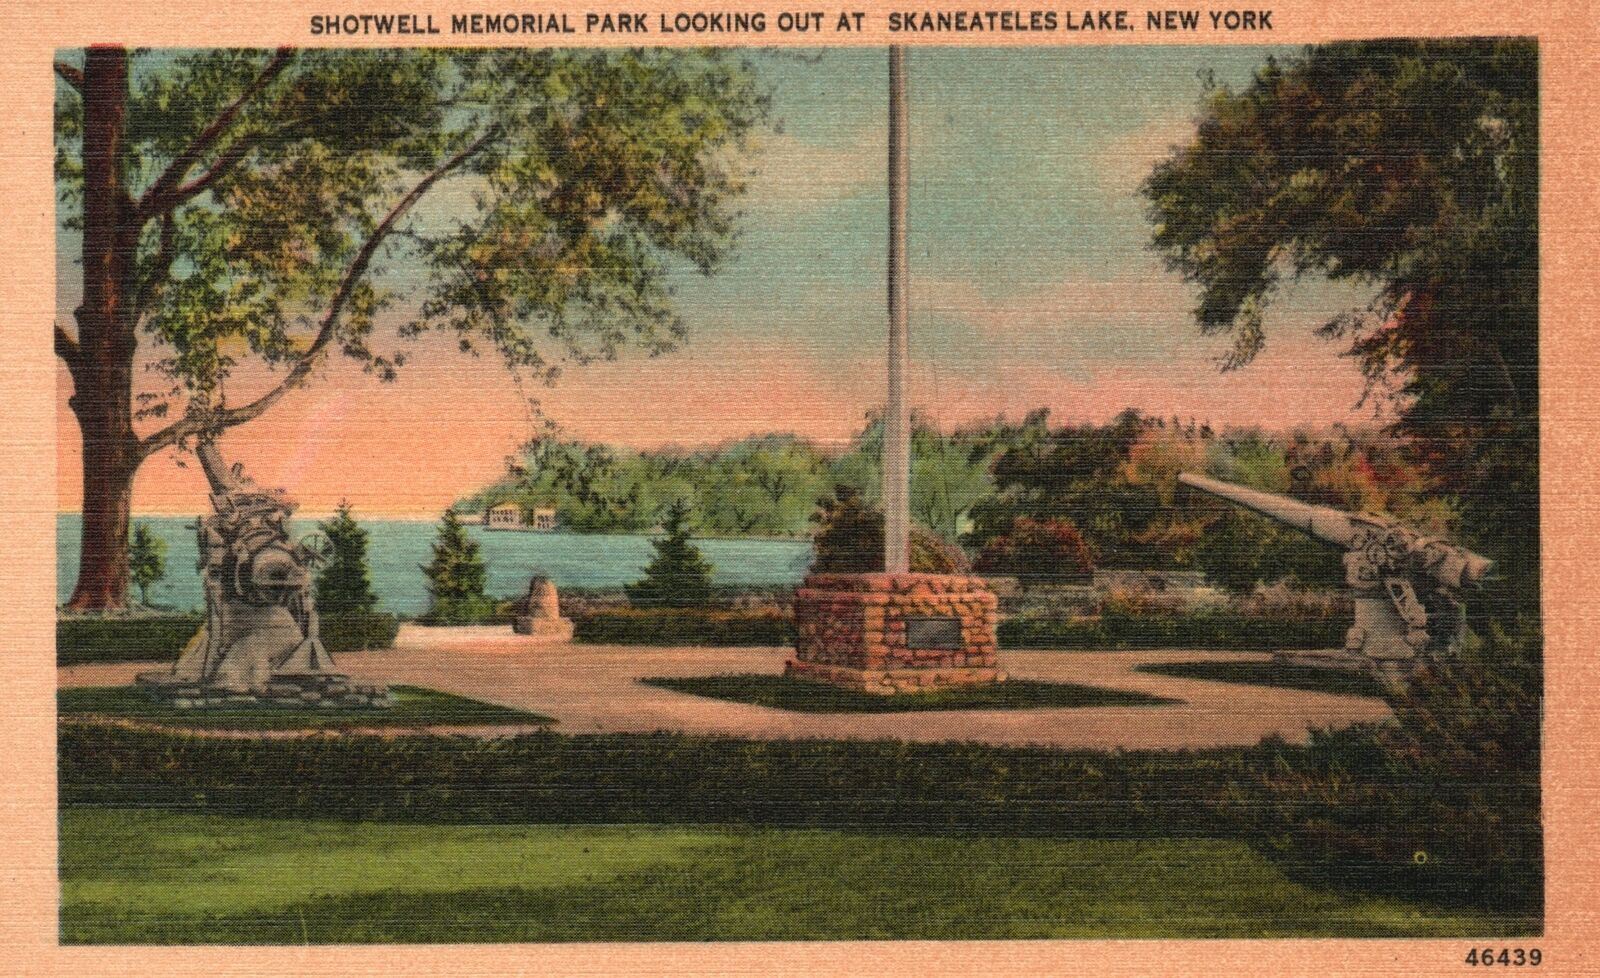 Vintage Postcard Shotwell Memorial Park Looking Out Skaneateles Lake New York NY